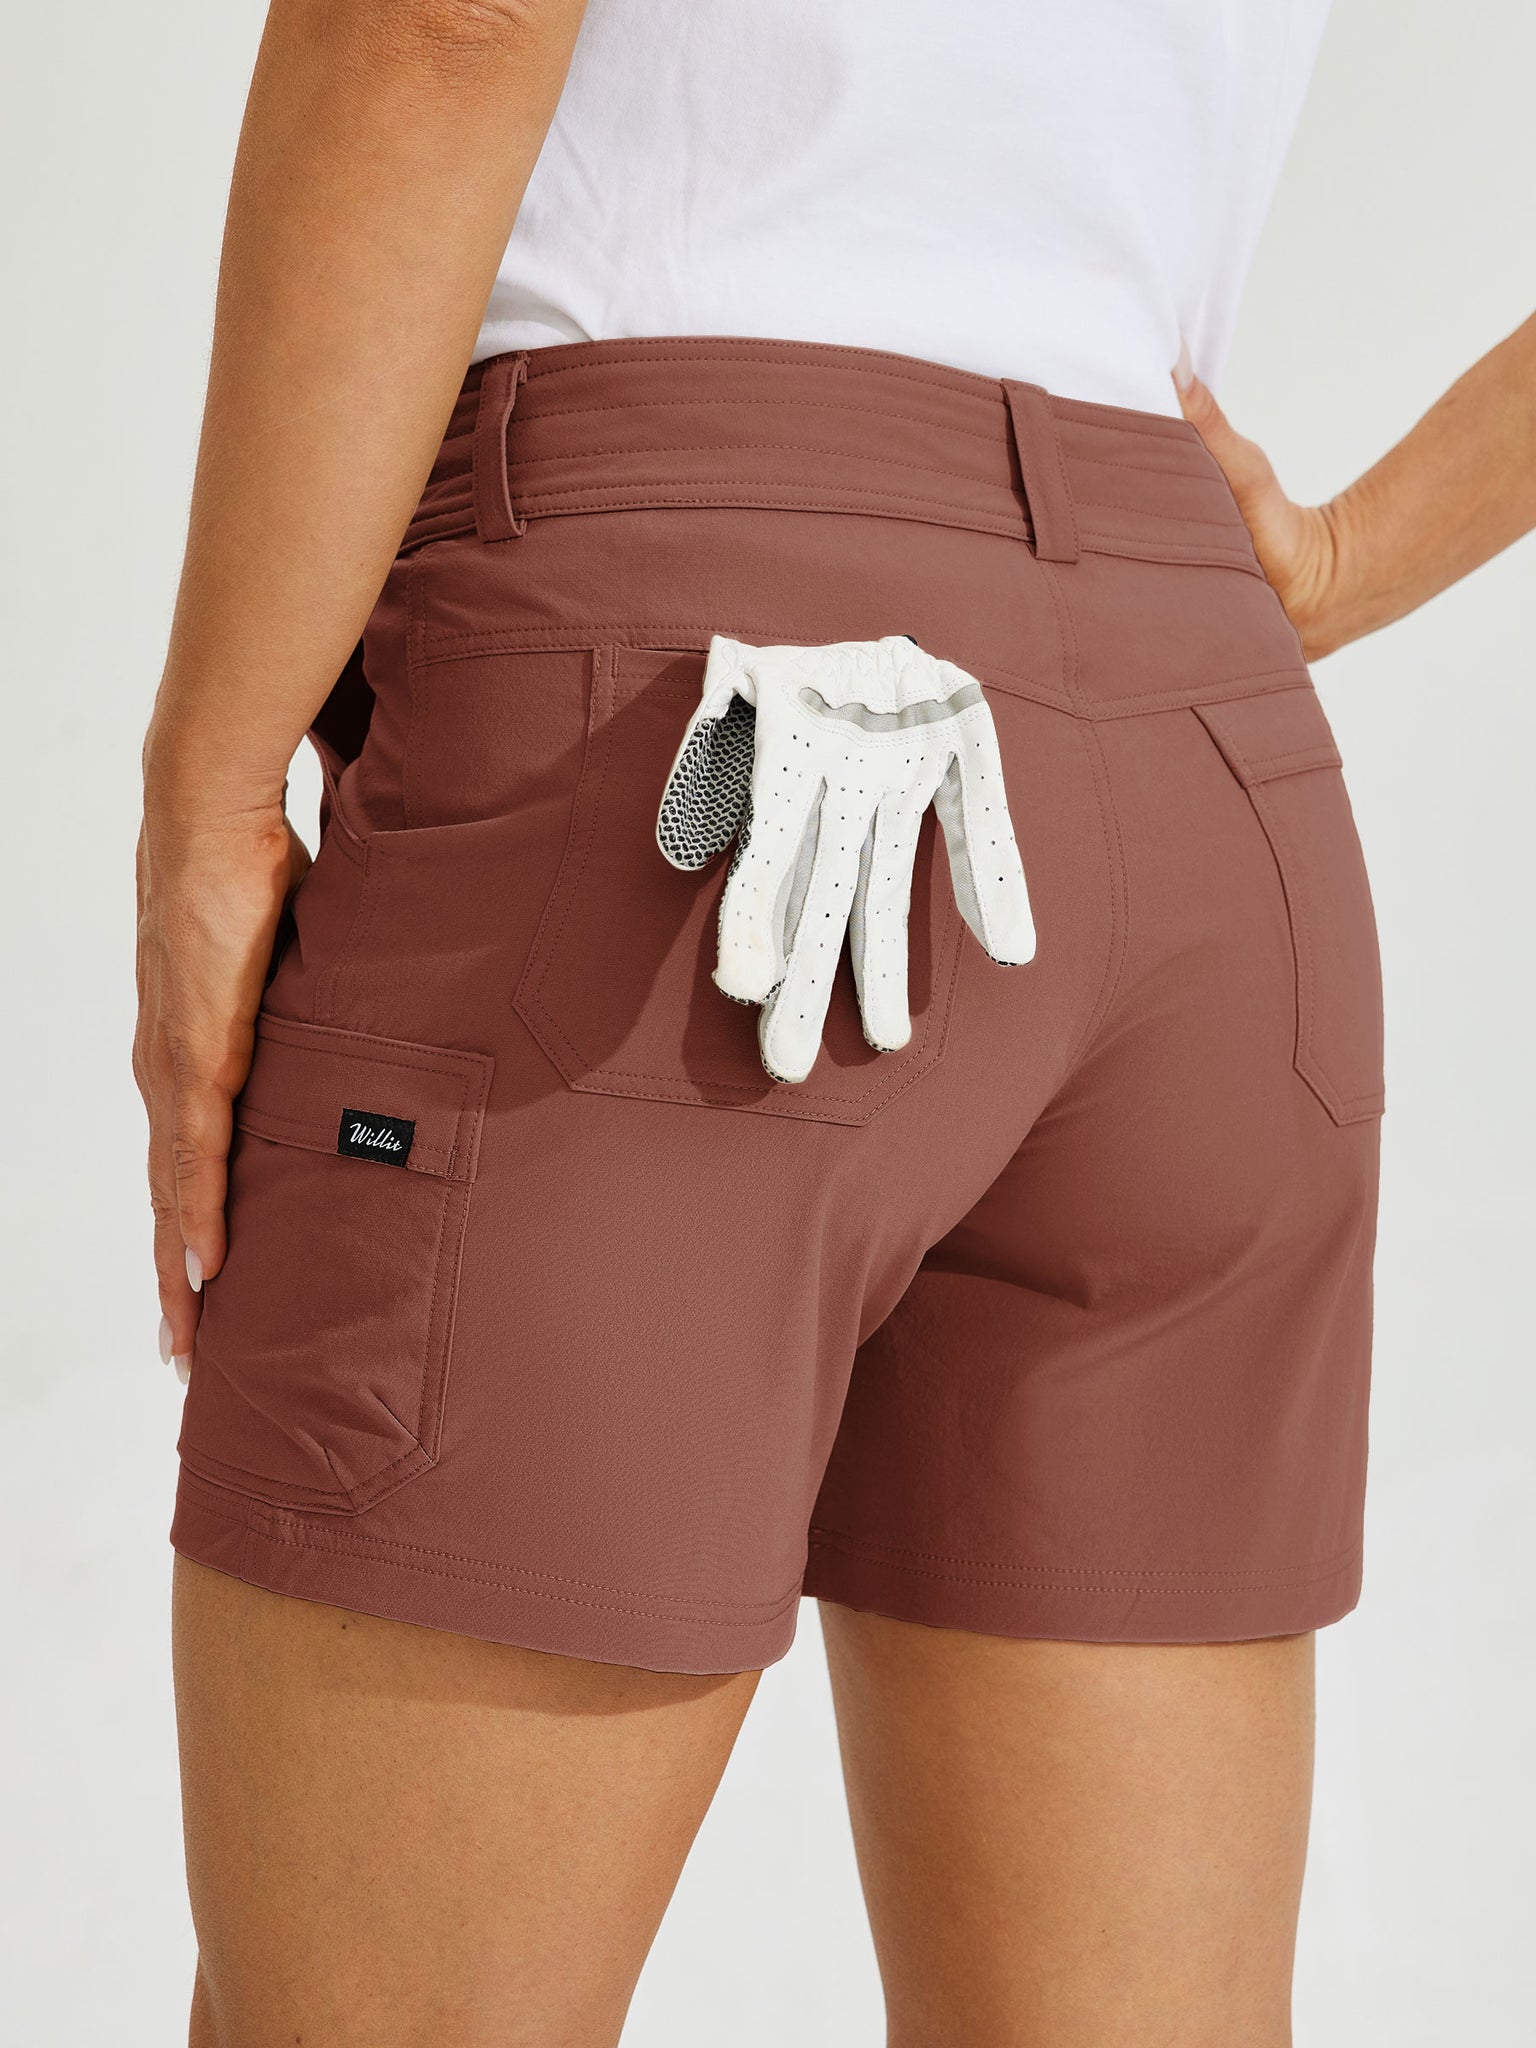 Women's Outdoor Pro Shorts 5Inch_Cacao2